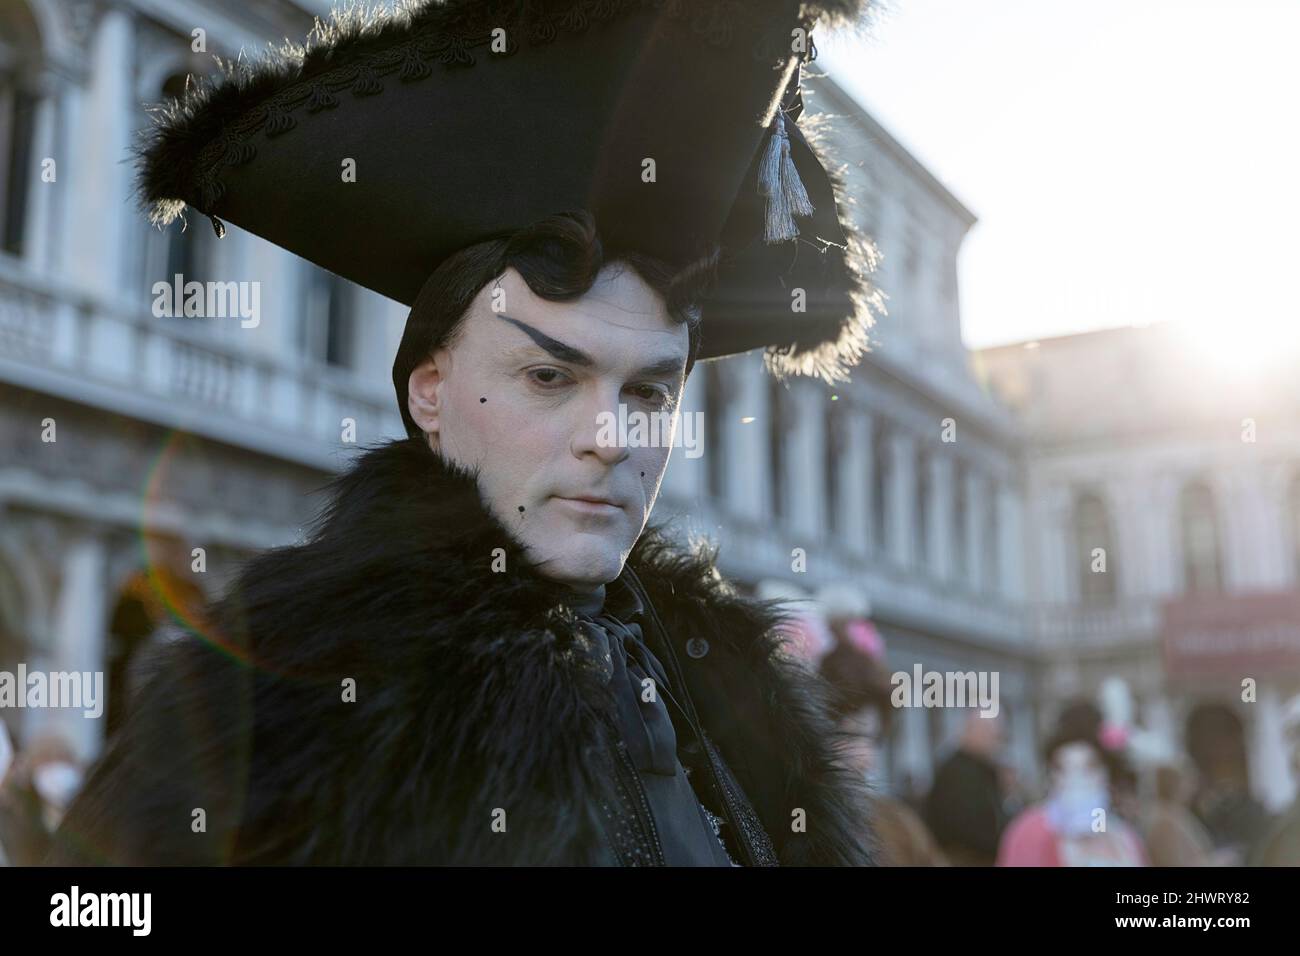 Man in a beautiful traditional venetian costume and mask posing at the Venice carneval. St. Mark's Square, Venice Stock Photo